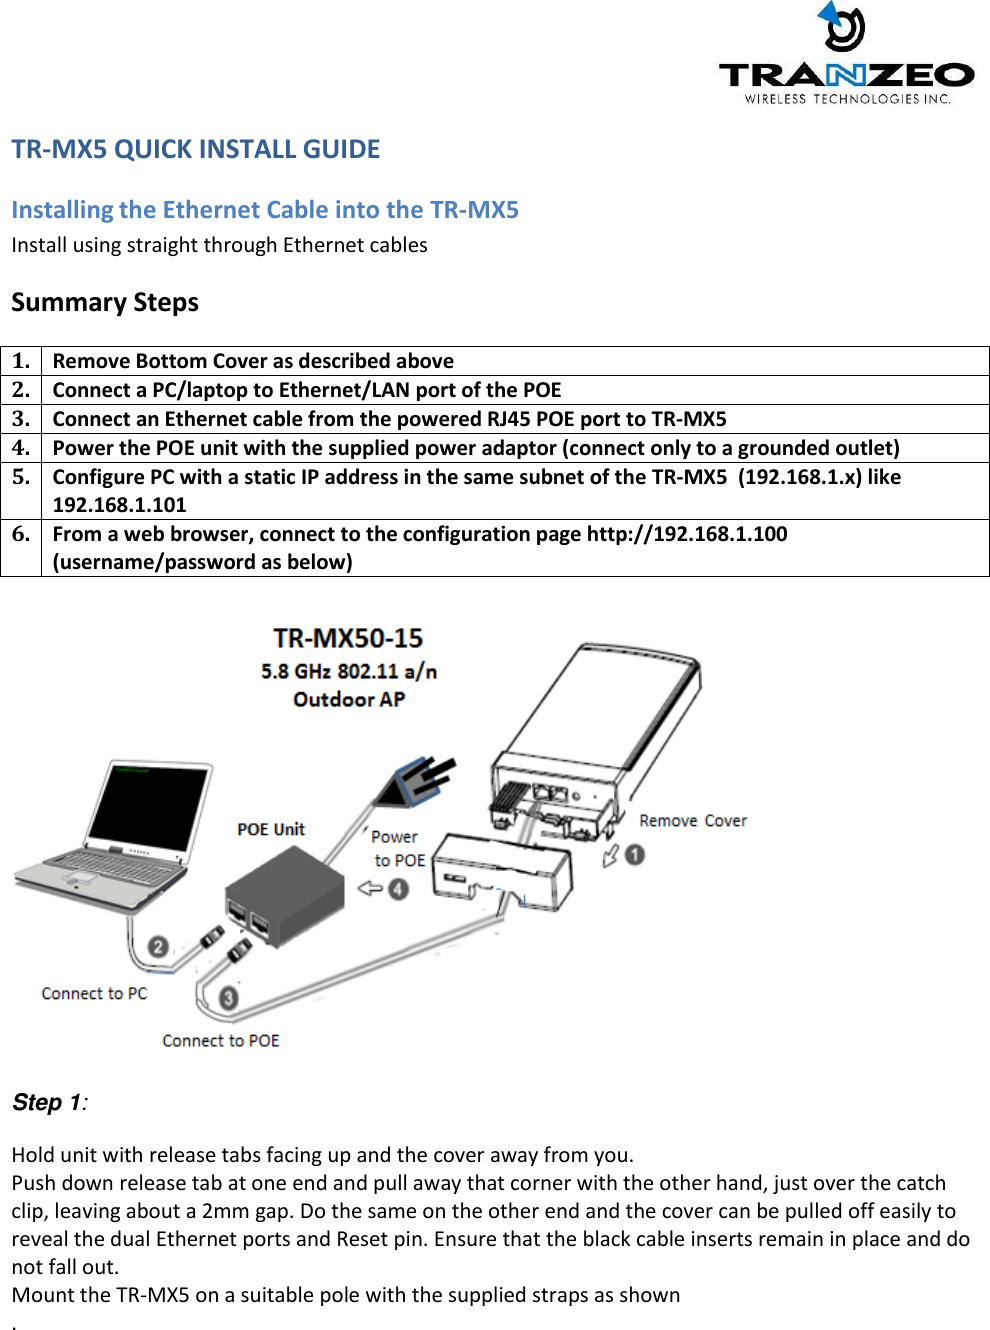     TR-MX5 QUICK INSTALL GUIDE  Installing the Ethernet Cable into the TR-MX5 Install using straight through Ethernet cables Summary Steps 1. Remove Bottom Cover as described above 2. Connect a PC/laptop to Ethernet/LAN port of the POE 3. Connect an Ethernet cable from the powered RJ45 POE port to TR-MX5 4. Power the POE unit with the supplied power adaptor (connect only to a grounded outlet) 5. Configure PC with a static IP address in the same subnet of the TR-MX5  (192.168.1.x) like 192.168.1.101 6. From a web browser, connect to the configuration page http://192.168.1.100 (username/password as below)     Step 1:  Hold unit with release tabs facing up and the cover away from you. Push down release tab at one end and pull away that corner with the other hand, just over the catch clip, leaving about a 2mm gap. Do the same on the other end and the cover can be pulled off easily to reveal the dual Ethernet ports and Reset pin. Ensure that the black cable inserts remain in place and do not fall out. Mount the TR-MX5 on a suitable pole with the supplied straps as shown  .  